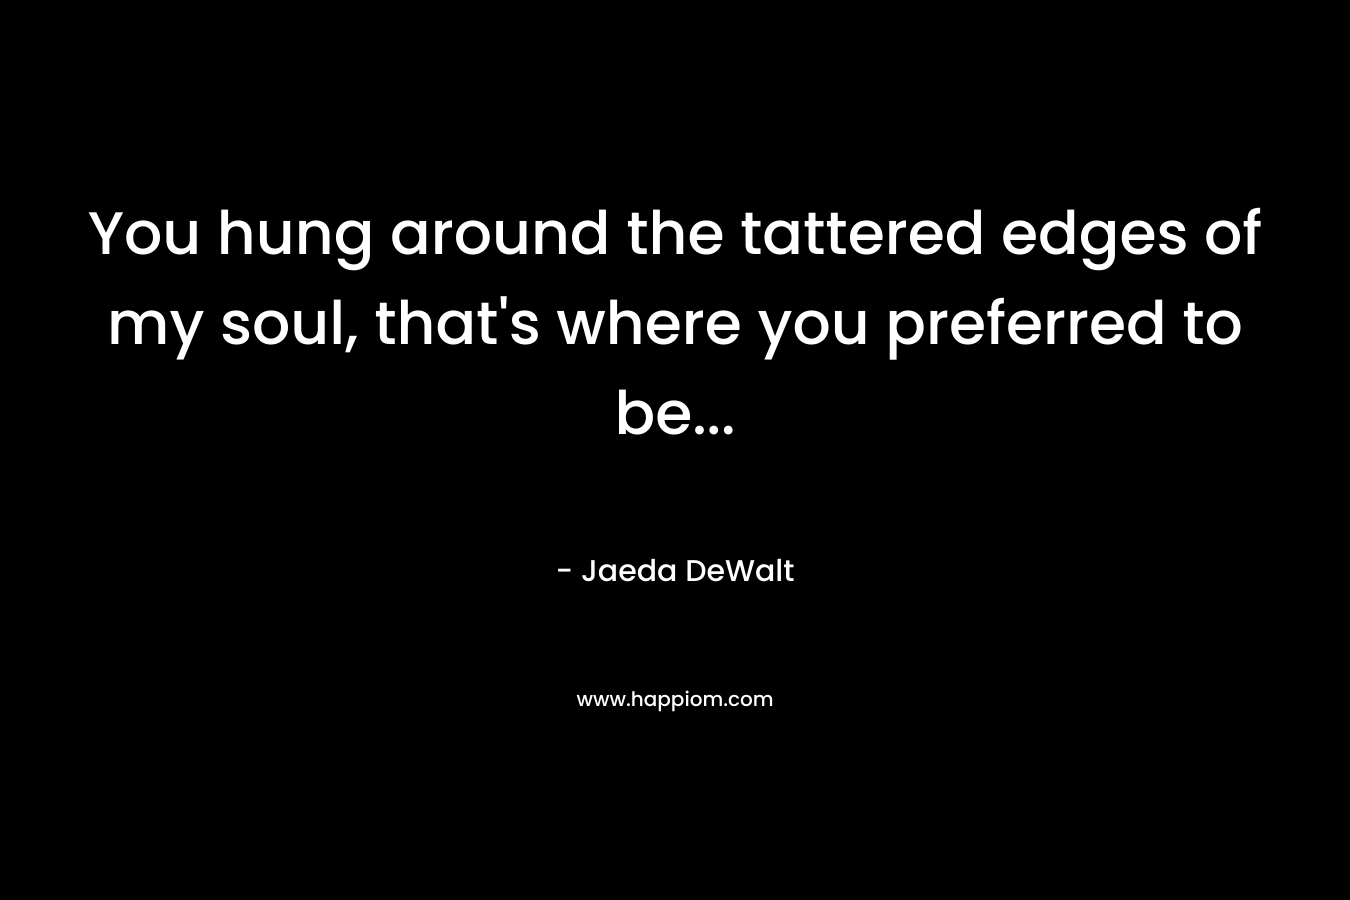 You hung around the tattered edges of my soul, that's where you preferred to be...